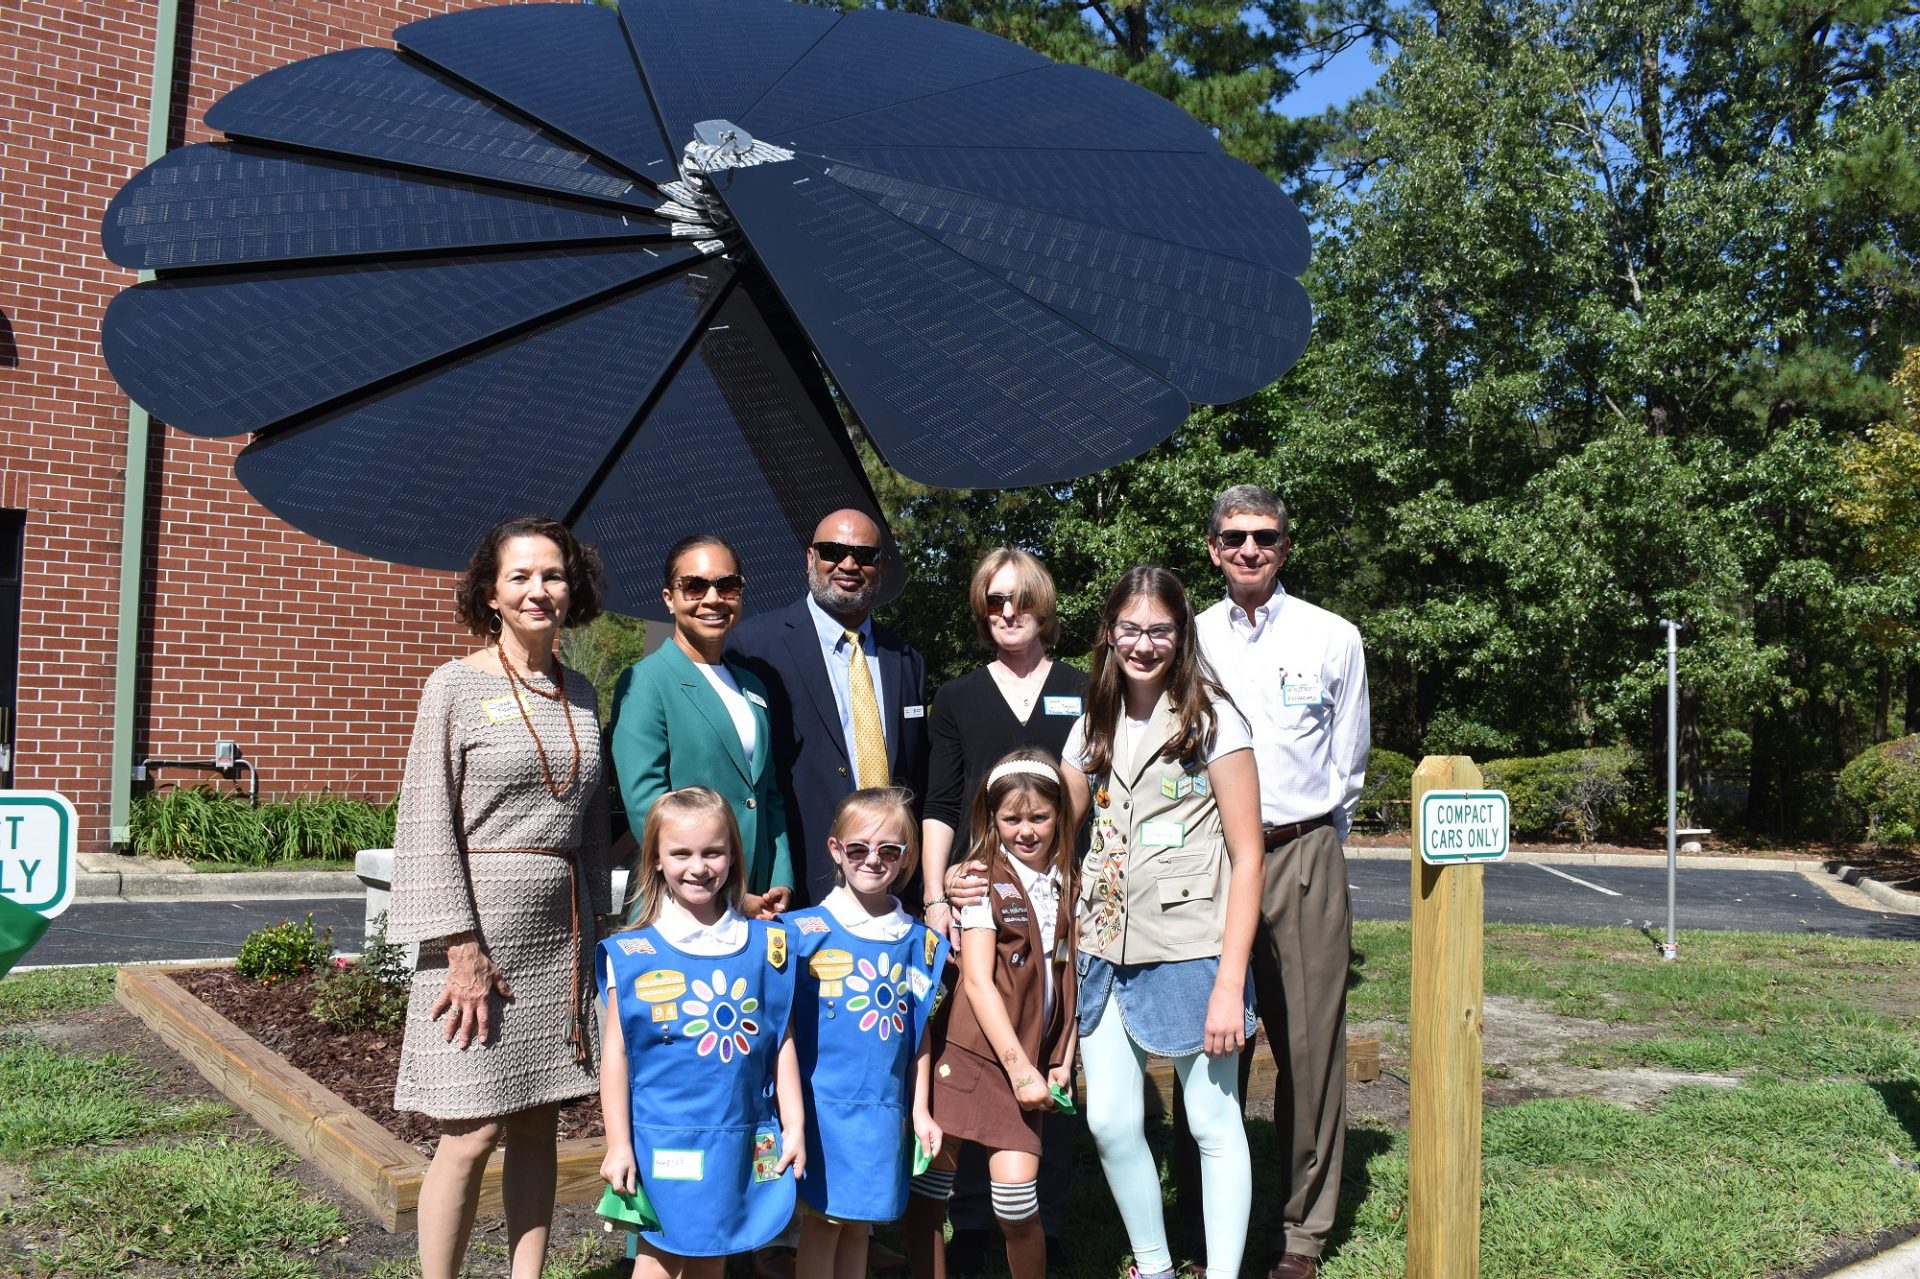 Local Girl Scouts and representatives from our funding partners at the SmartFlower ribbon cutting: Senator Kaine’s Regional Director Diane Kaufman, Sarah Taylor and Whitney Saunders from The Blocker Foundation, and Tonya Byrd and Troy Lindsey from Dominion Energy.